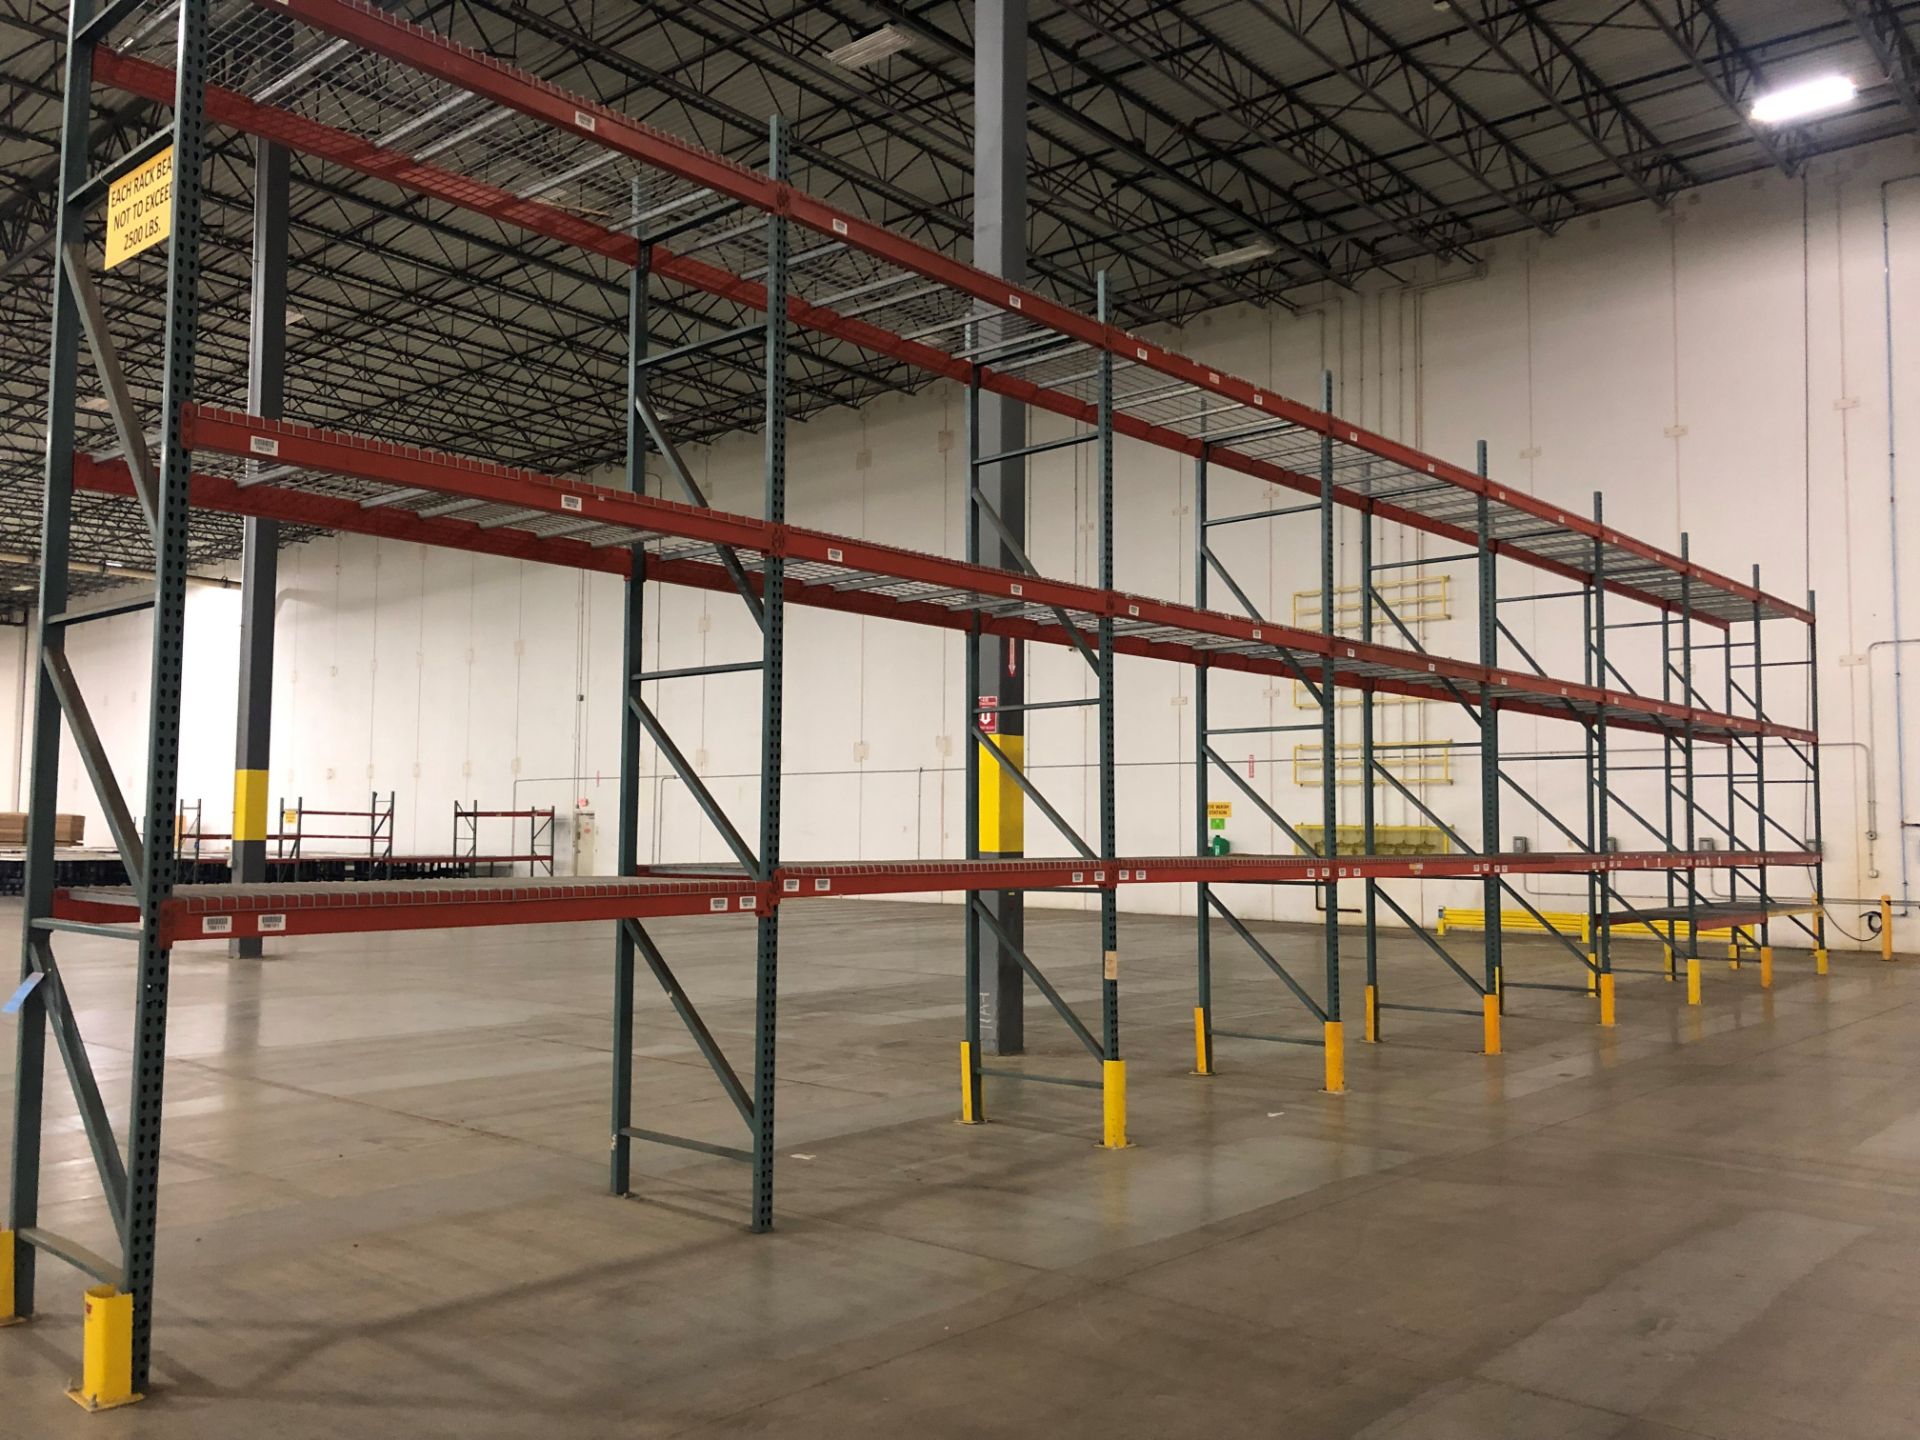 SECTIONS 42" X 96" X 15' HIGH PALLET RACK, (9) UPRIGHTS, (52) CROSS BEAMS, (52) WIRE DECKS **